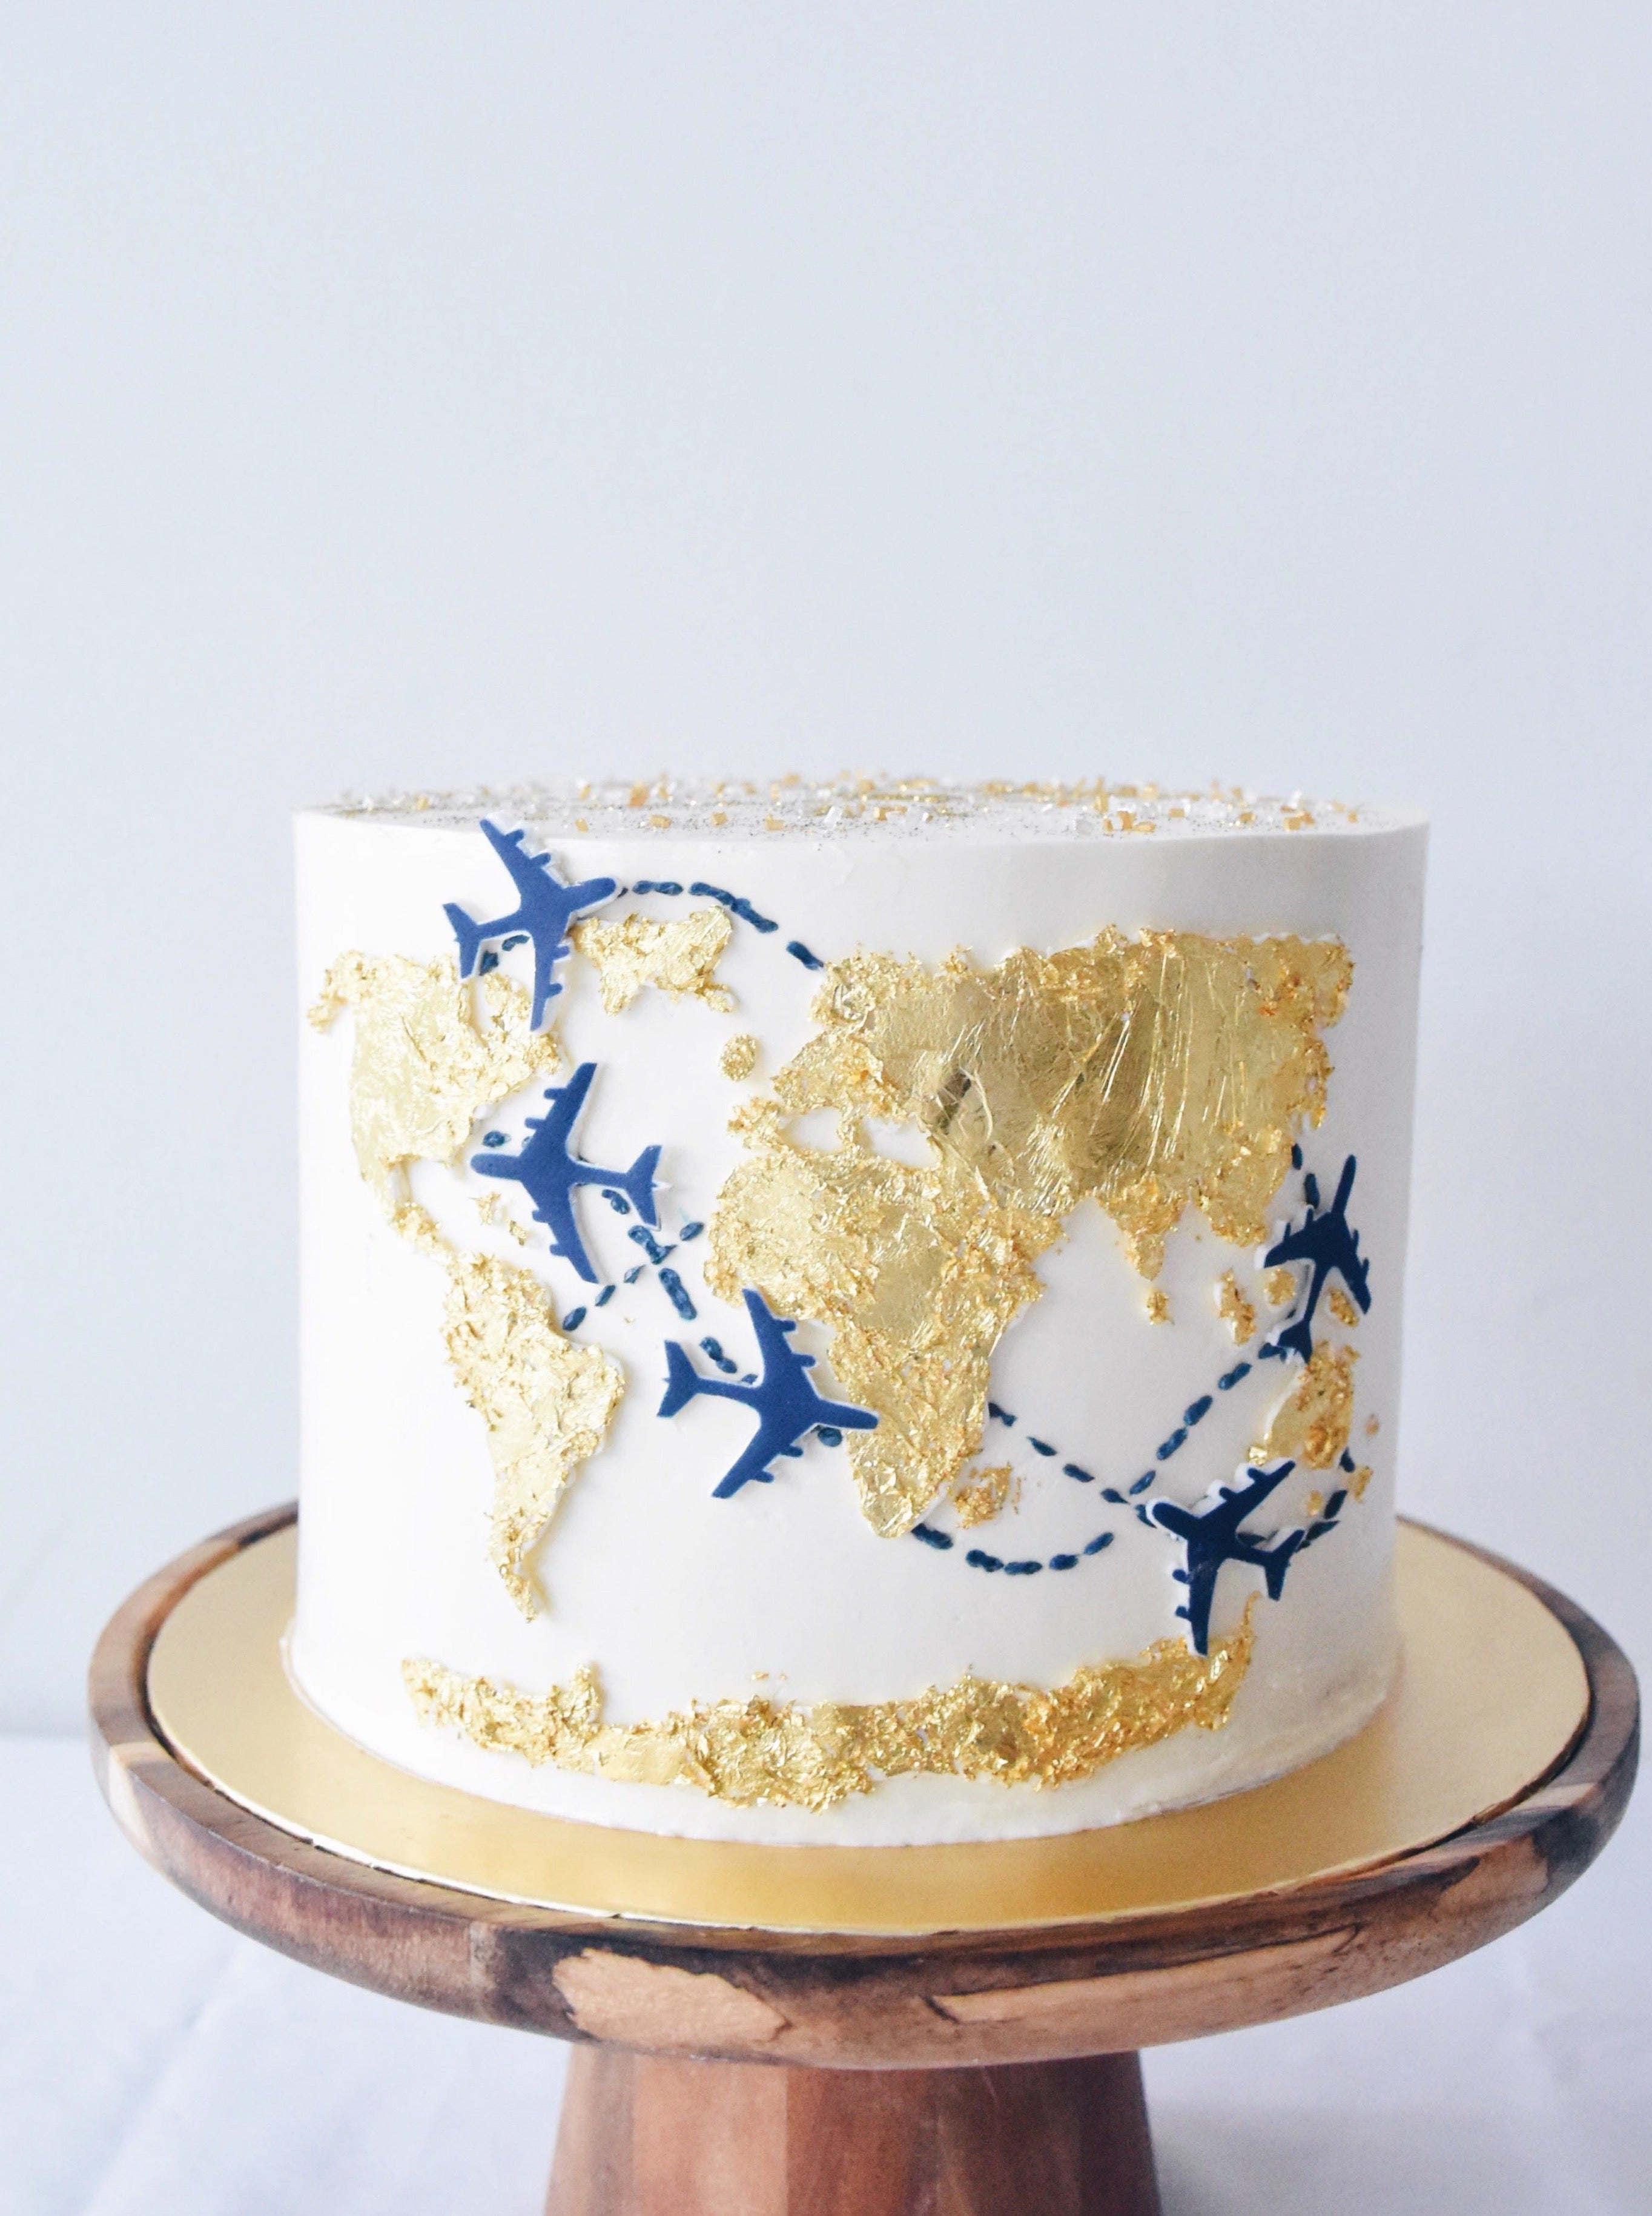 Multi-Tier New World Woman Cake - Order Online | Sydney Delivery